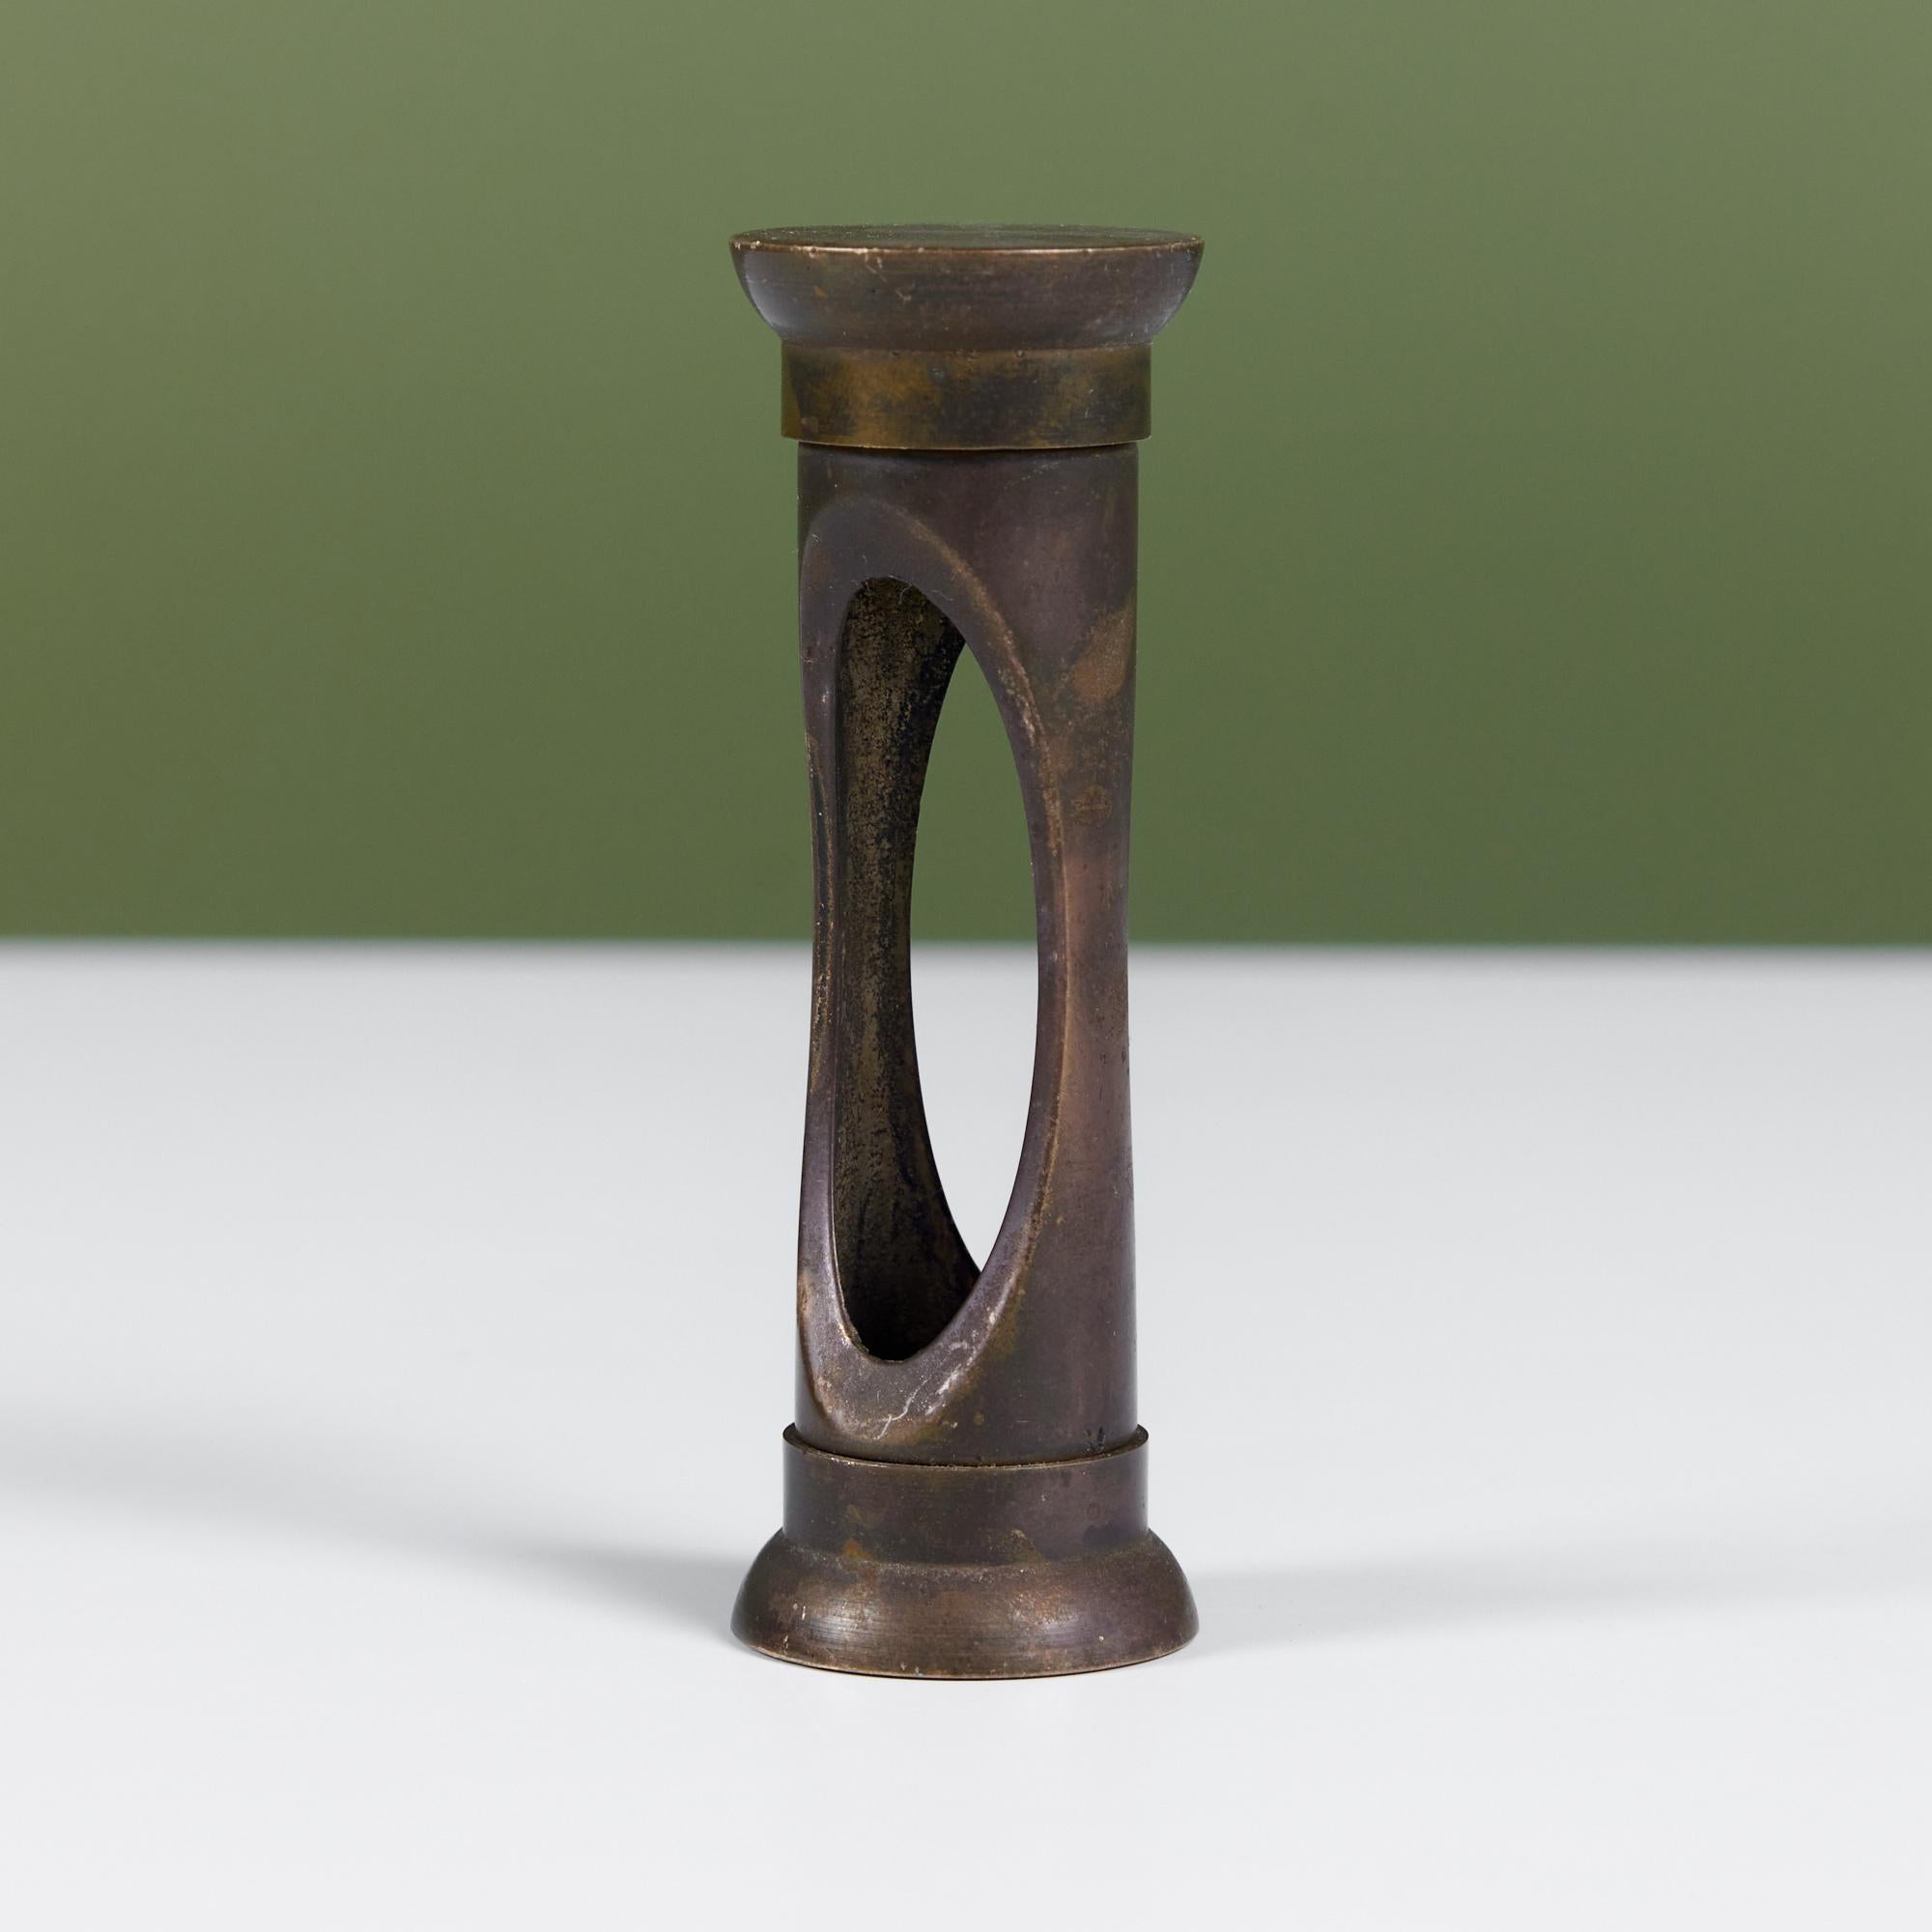 Perfectly patinated brass hourglass holder.

Dimensions
1.25